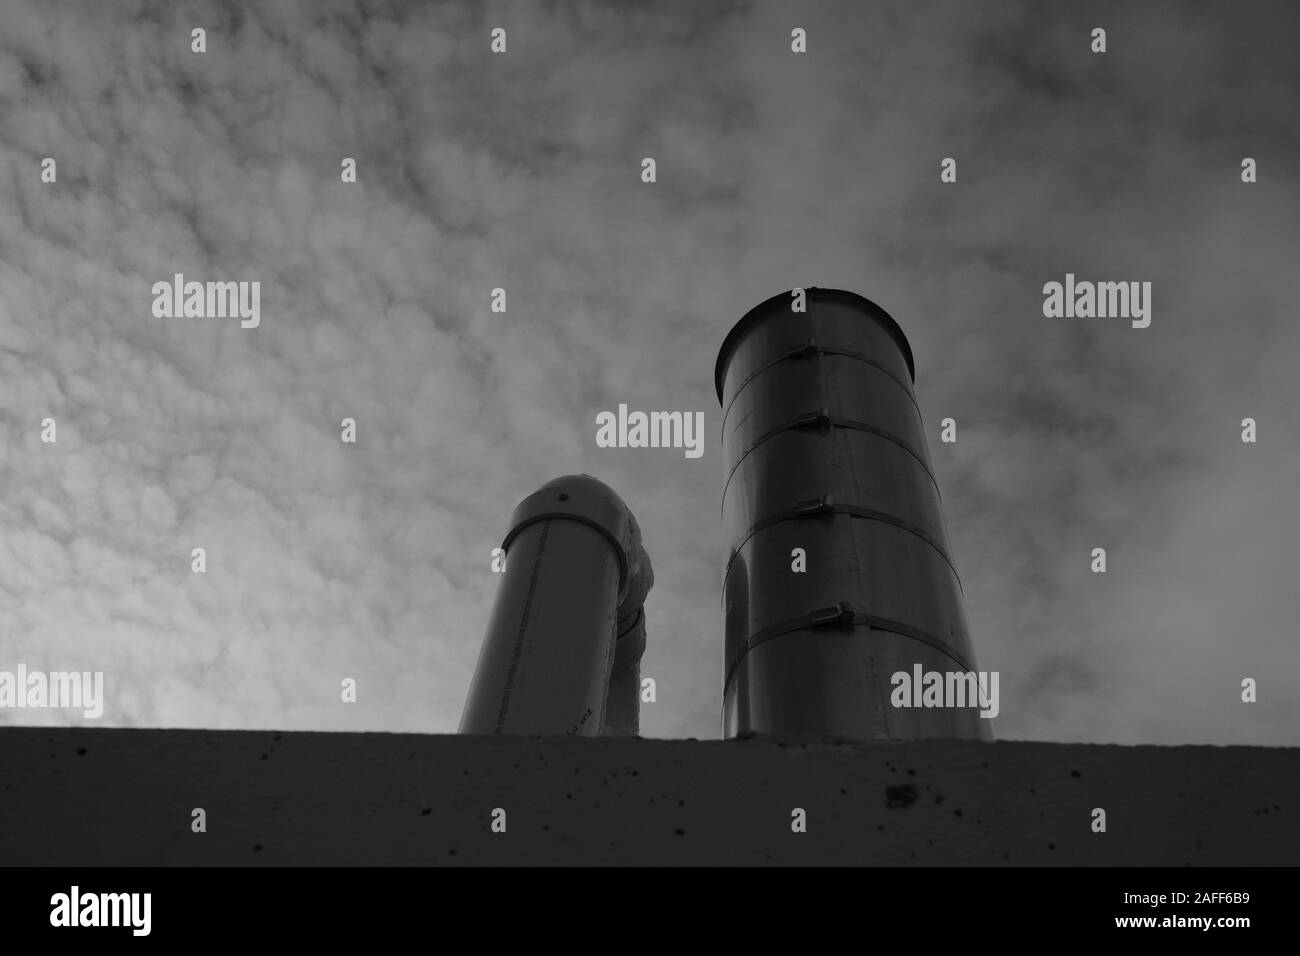 Black and white image of steel exhaust / heat exchange chimneys on the top of a garage, against a cloudy sky. Ottawa, Ontario, Canada. Stock Photo